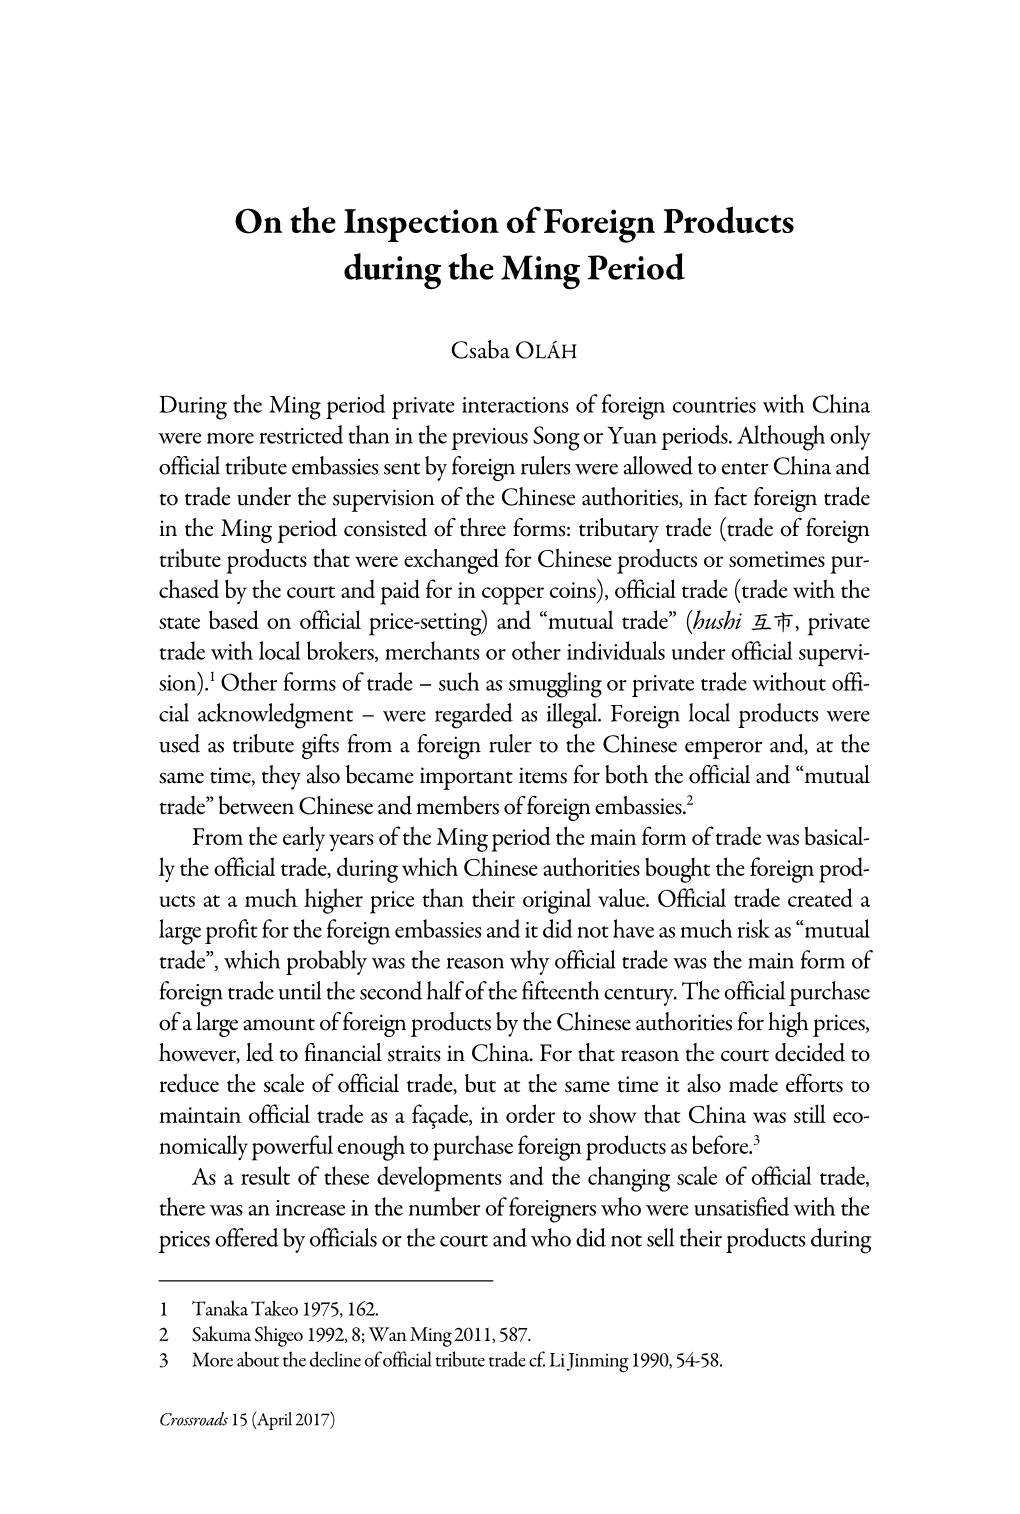 On the Inspection of Foreign Products During the Ming Period